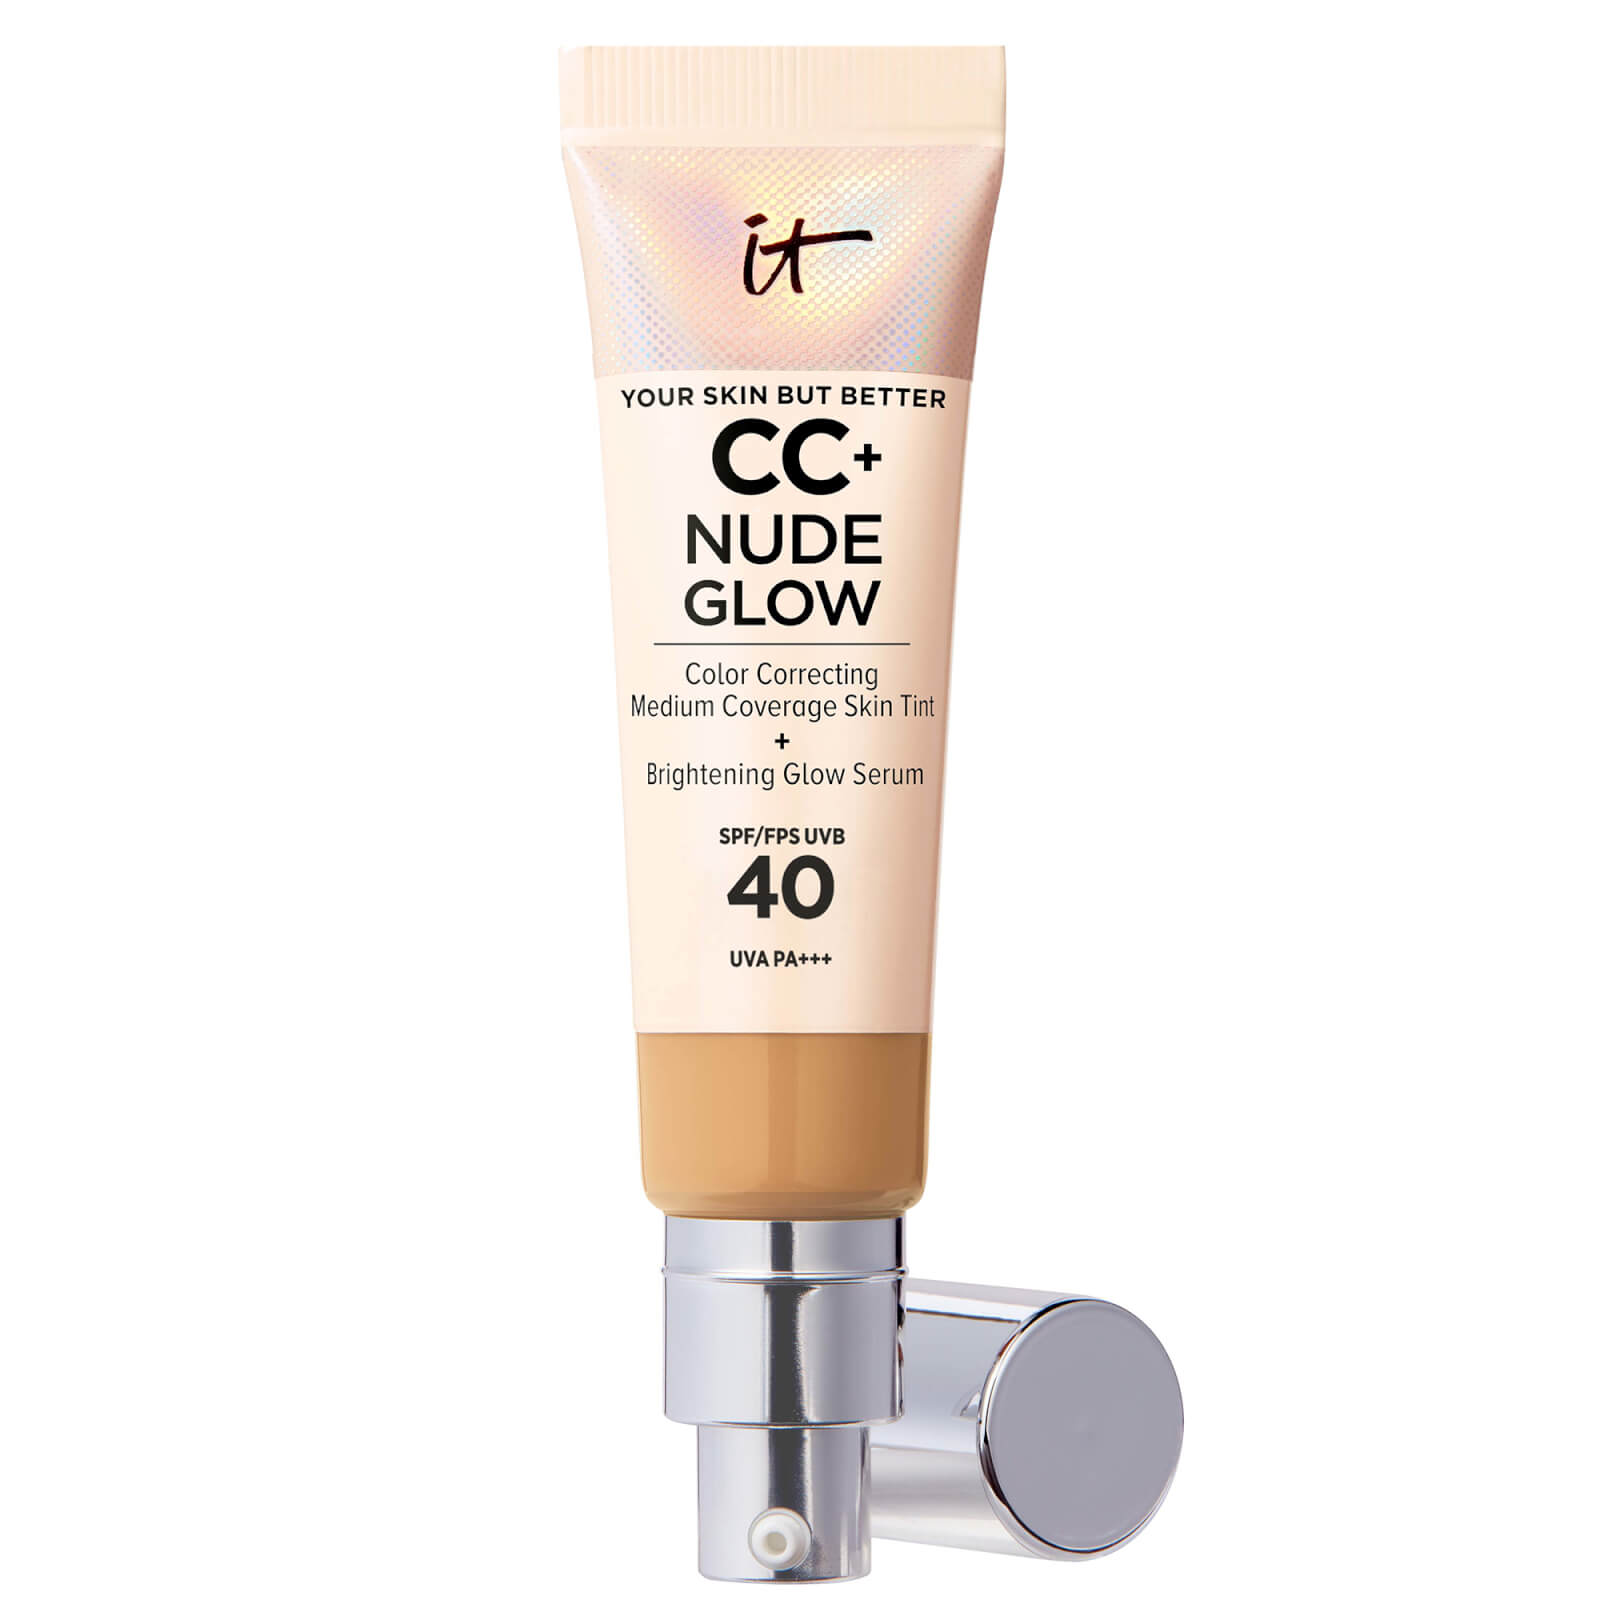 IT Cosmetics CC+ and Nude Glow Lightweight Foundation and Glow Serum with SPF40 32ml (Various Shades) - Tan Warm